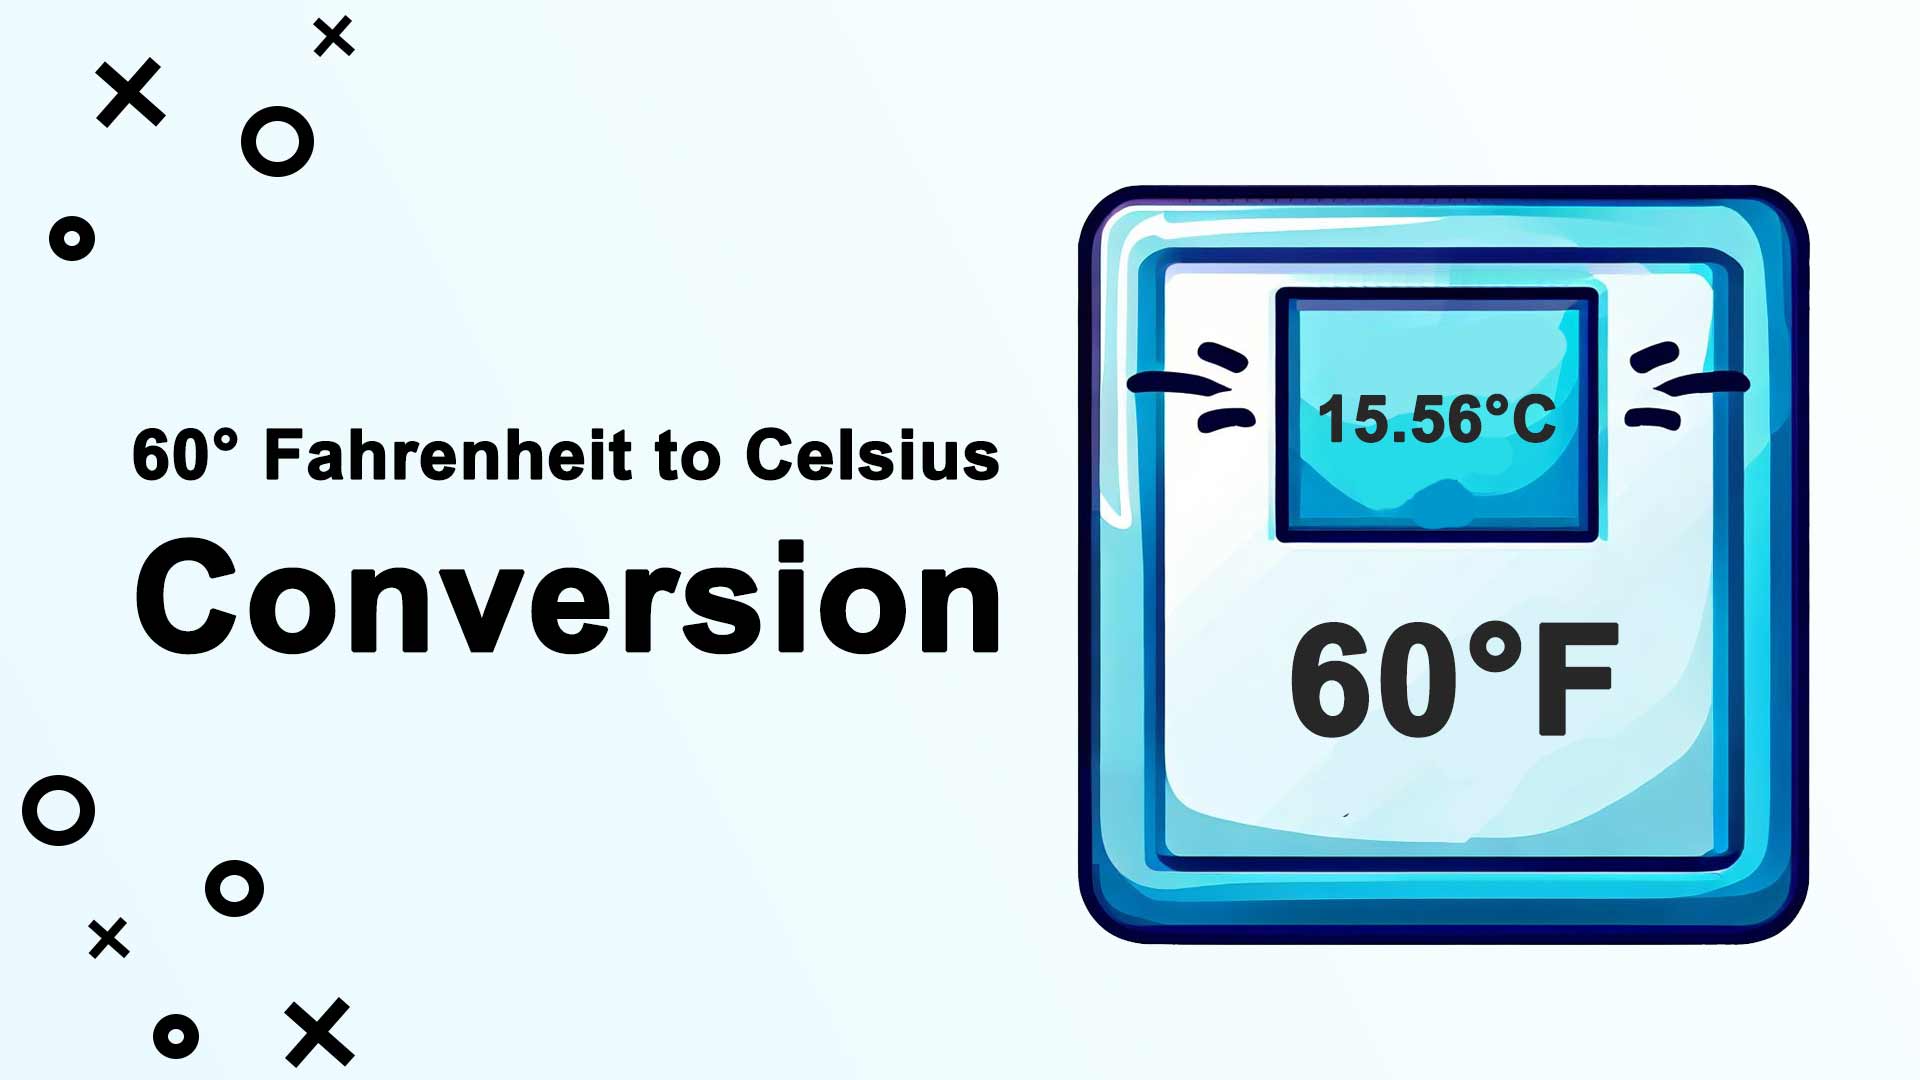 What is 60 f in c - Convert 60 degrees Fahrenheit to Celsius